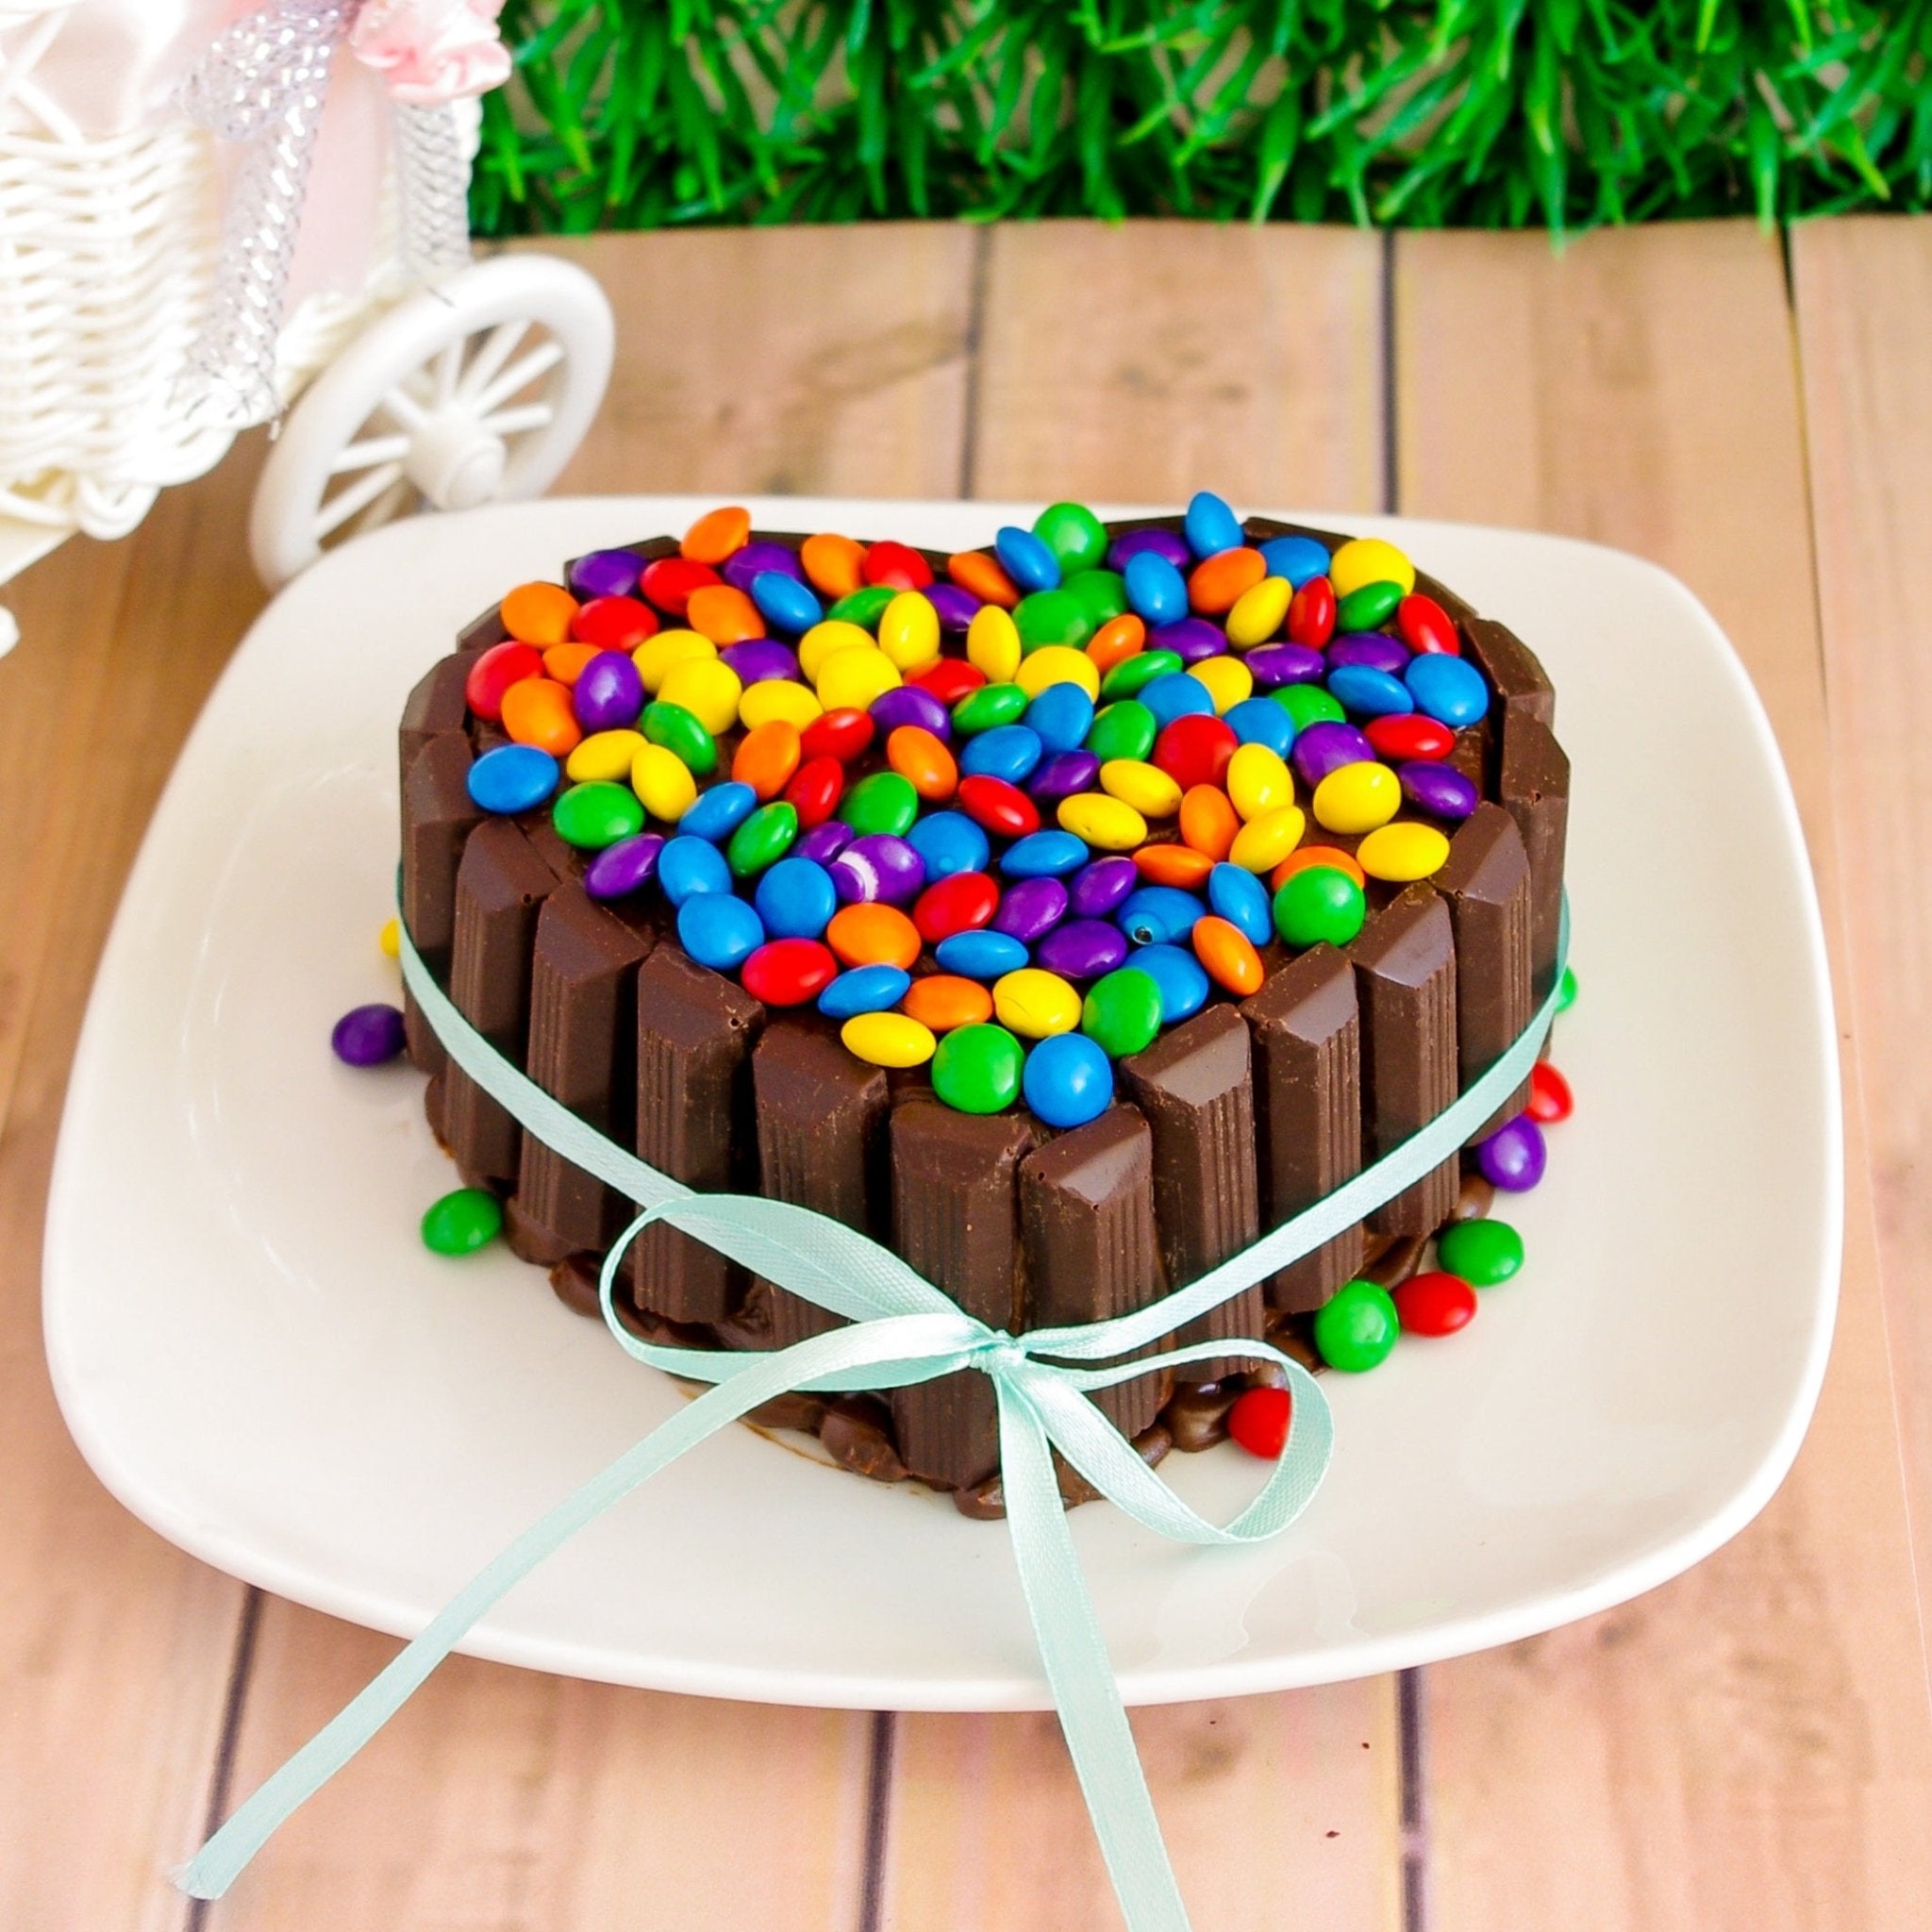 How To Make a Rainbow Layer Cake with a Candy Surprise Inside | The Kitchn